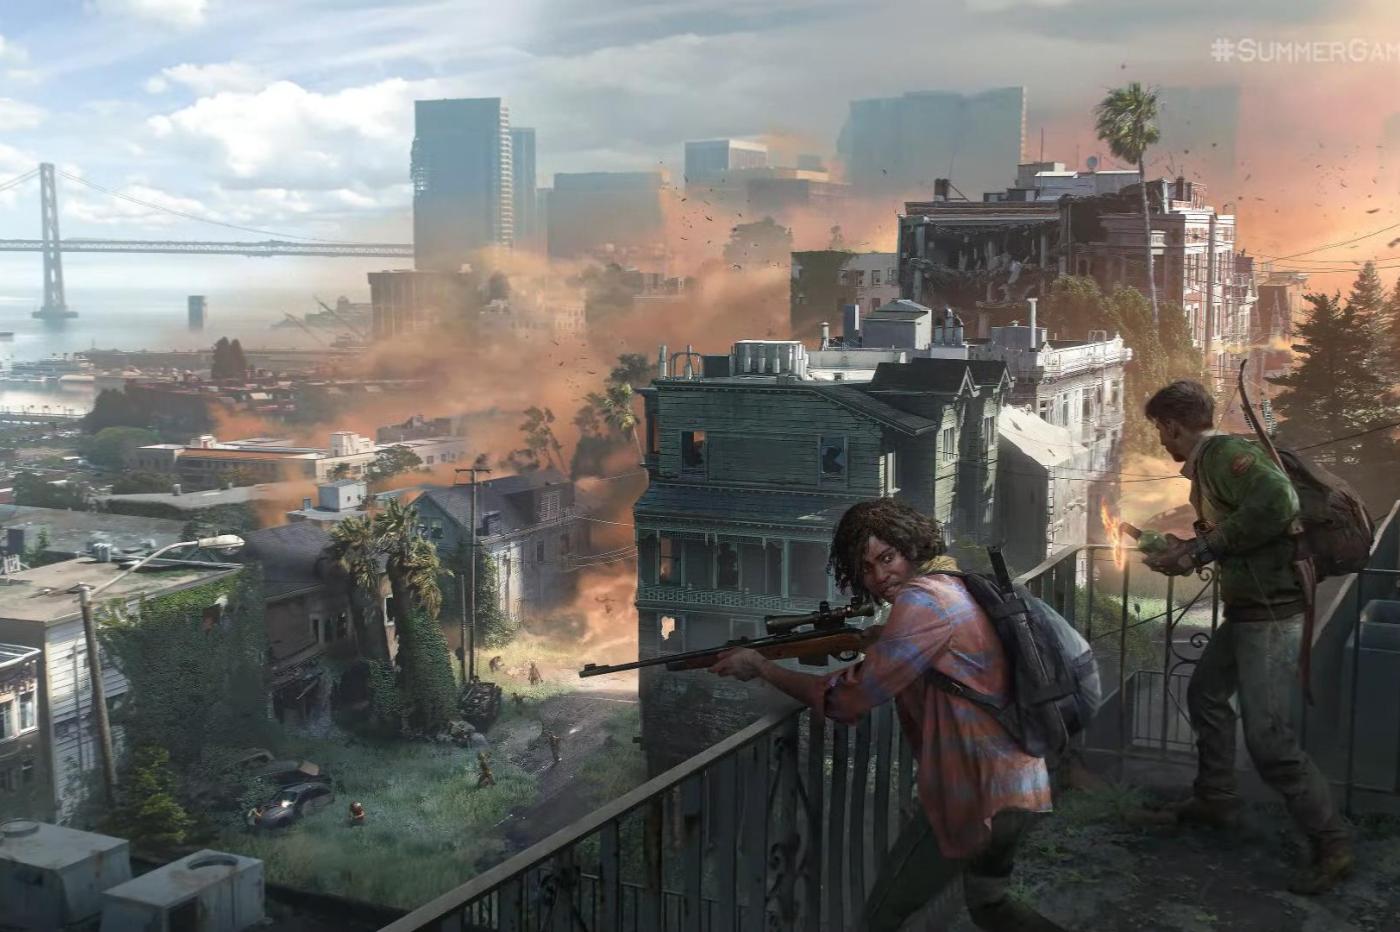 Concept Art of the future multiplayer game in the universe of The Last of Us